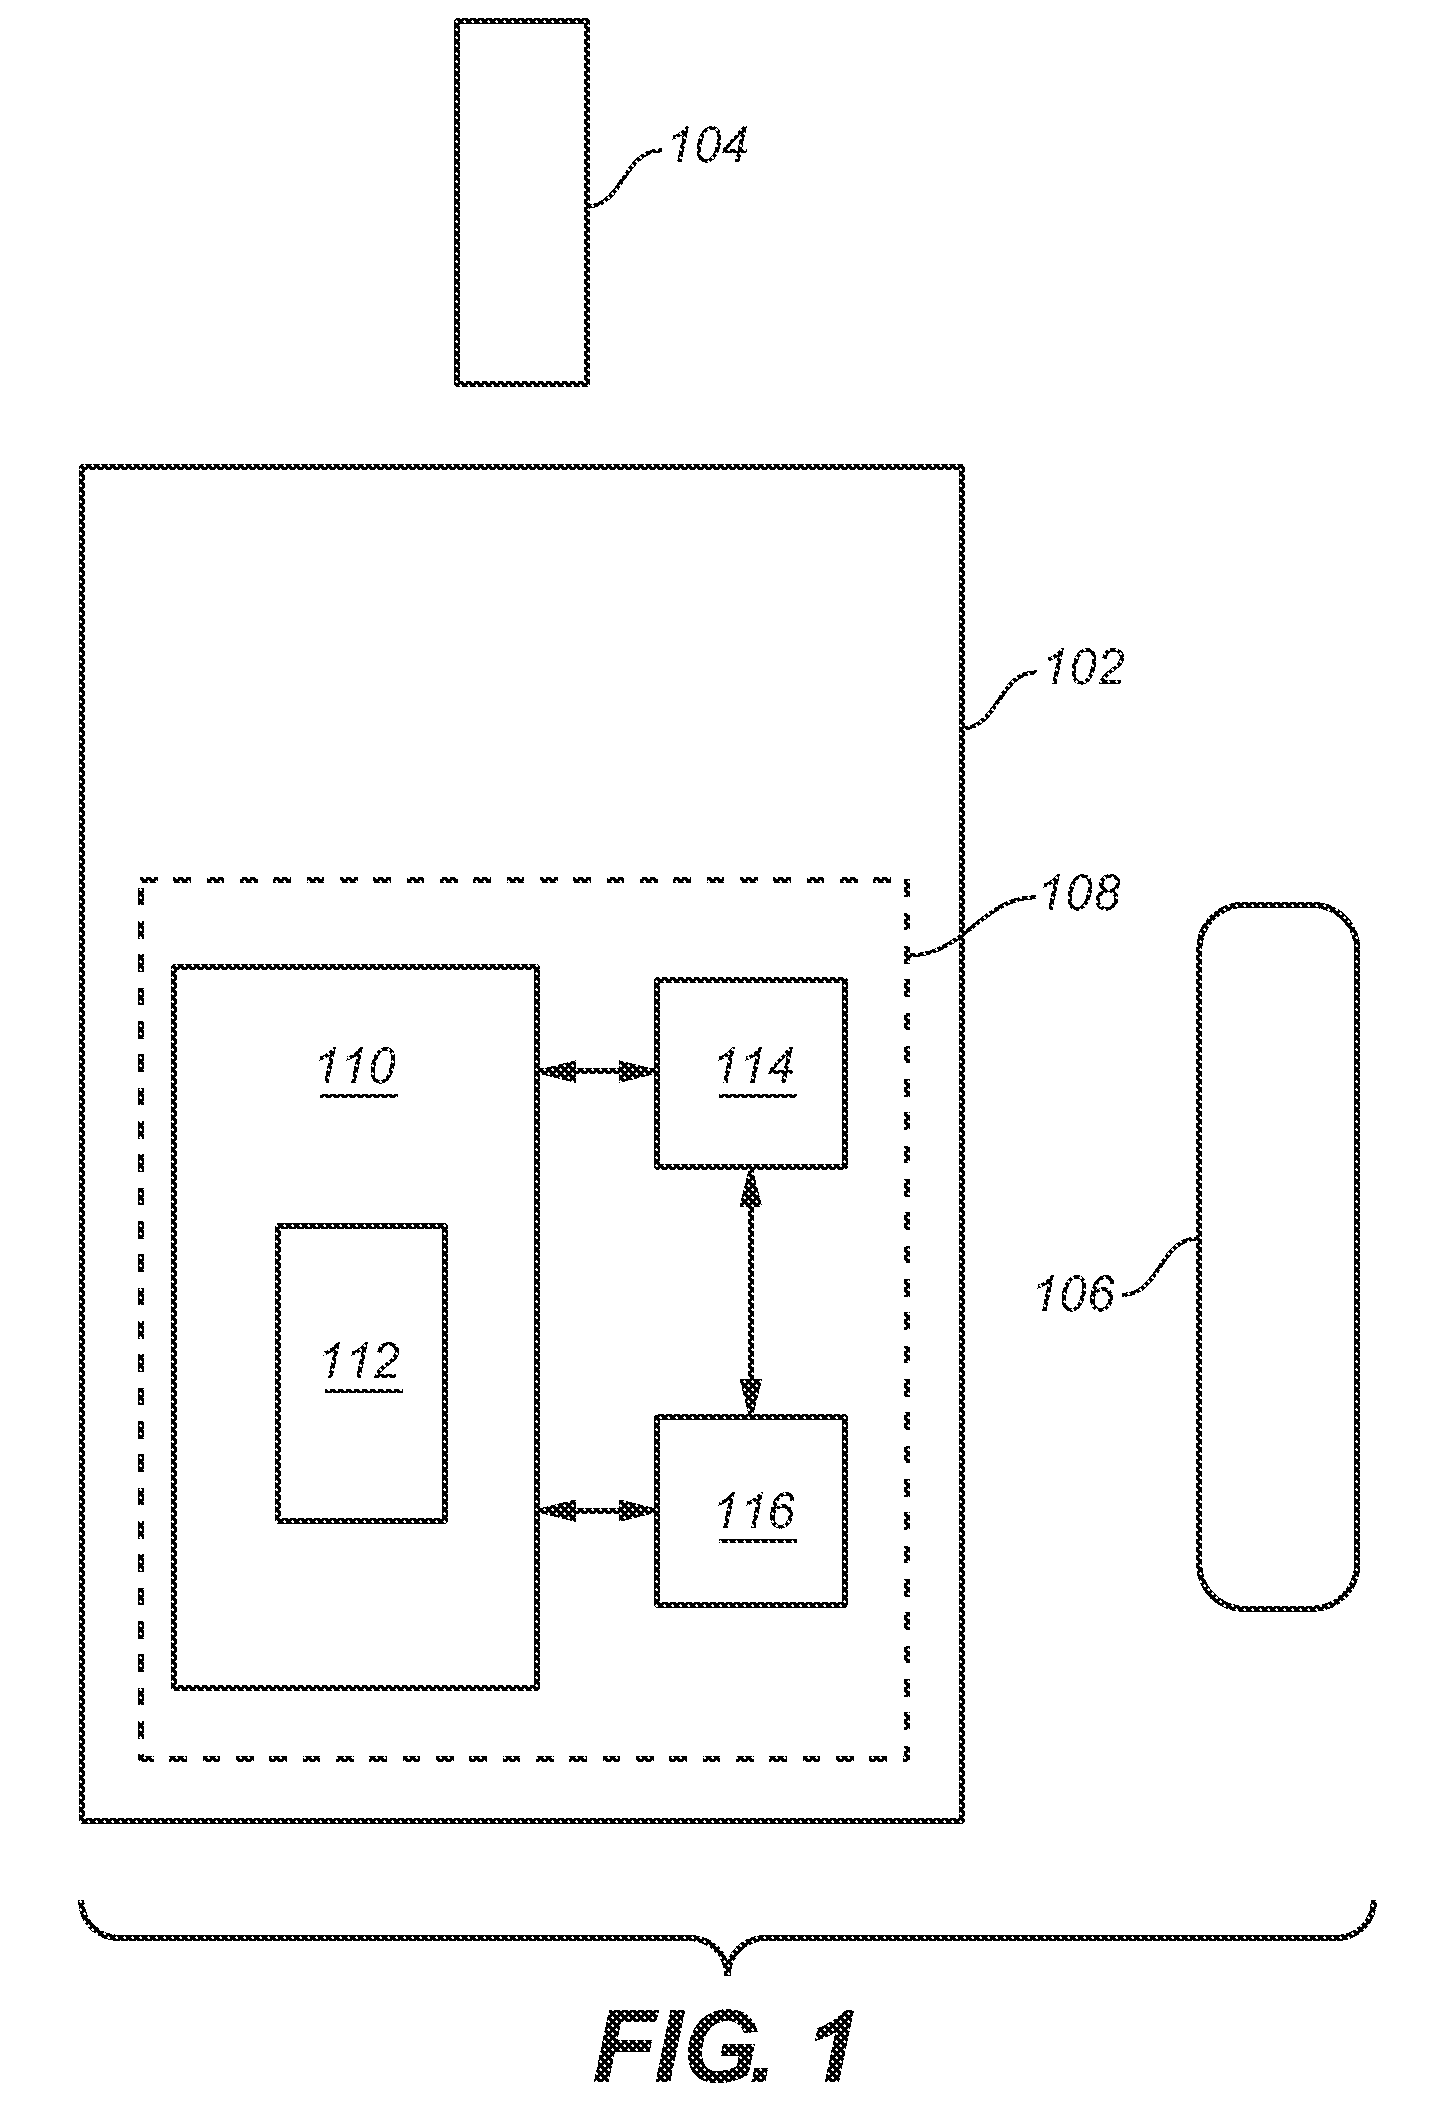 Kit for the determination of an analyte in a bodily fluid sample that includes a meter with a display-based tutorial module